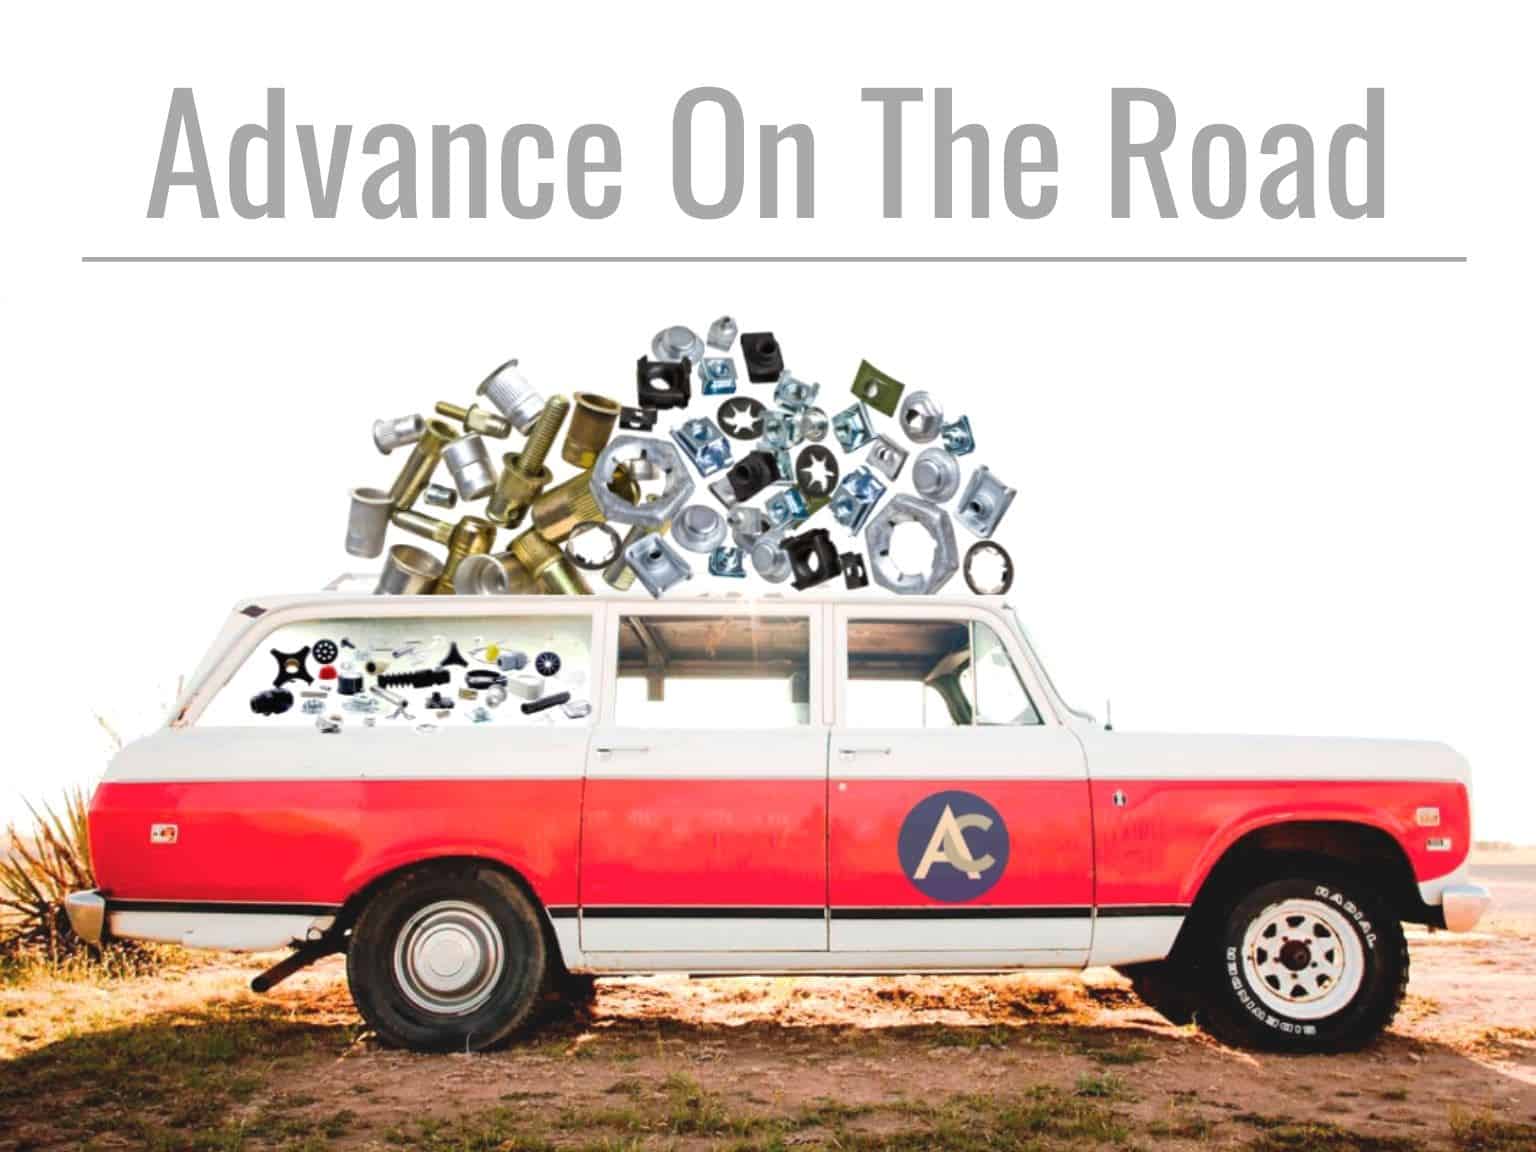 Fastener Industry Event 2022, Advance On The Road